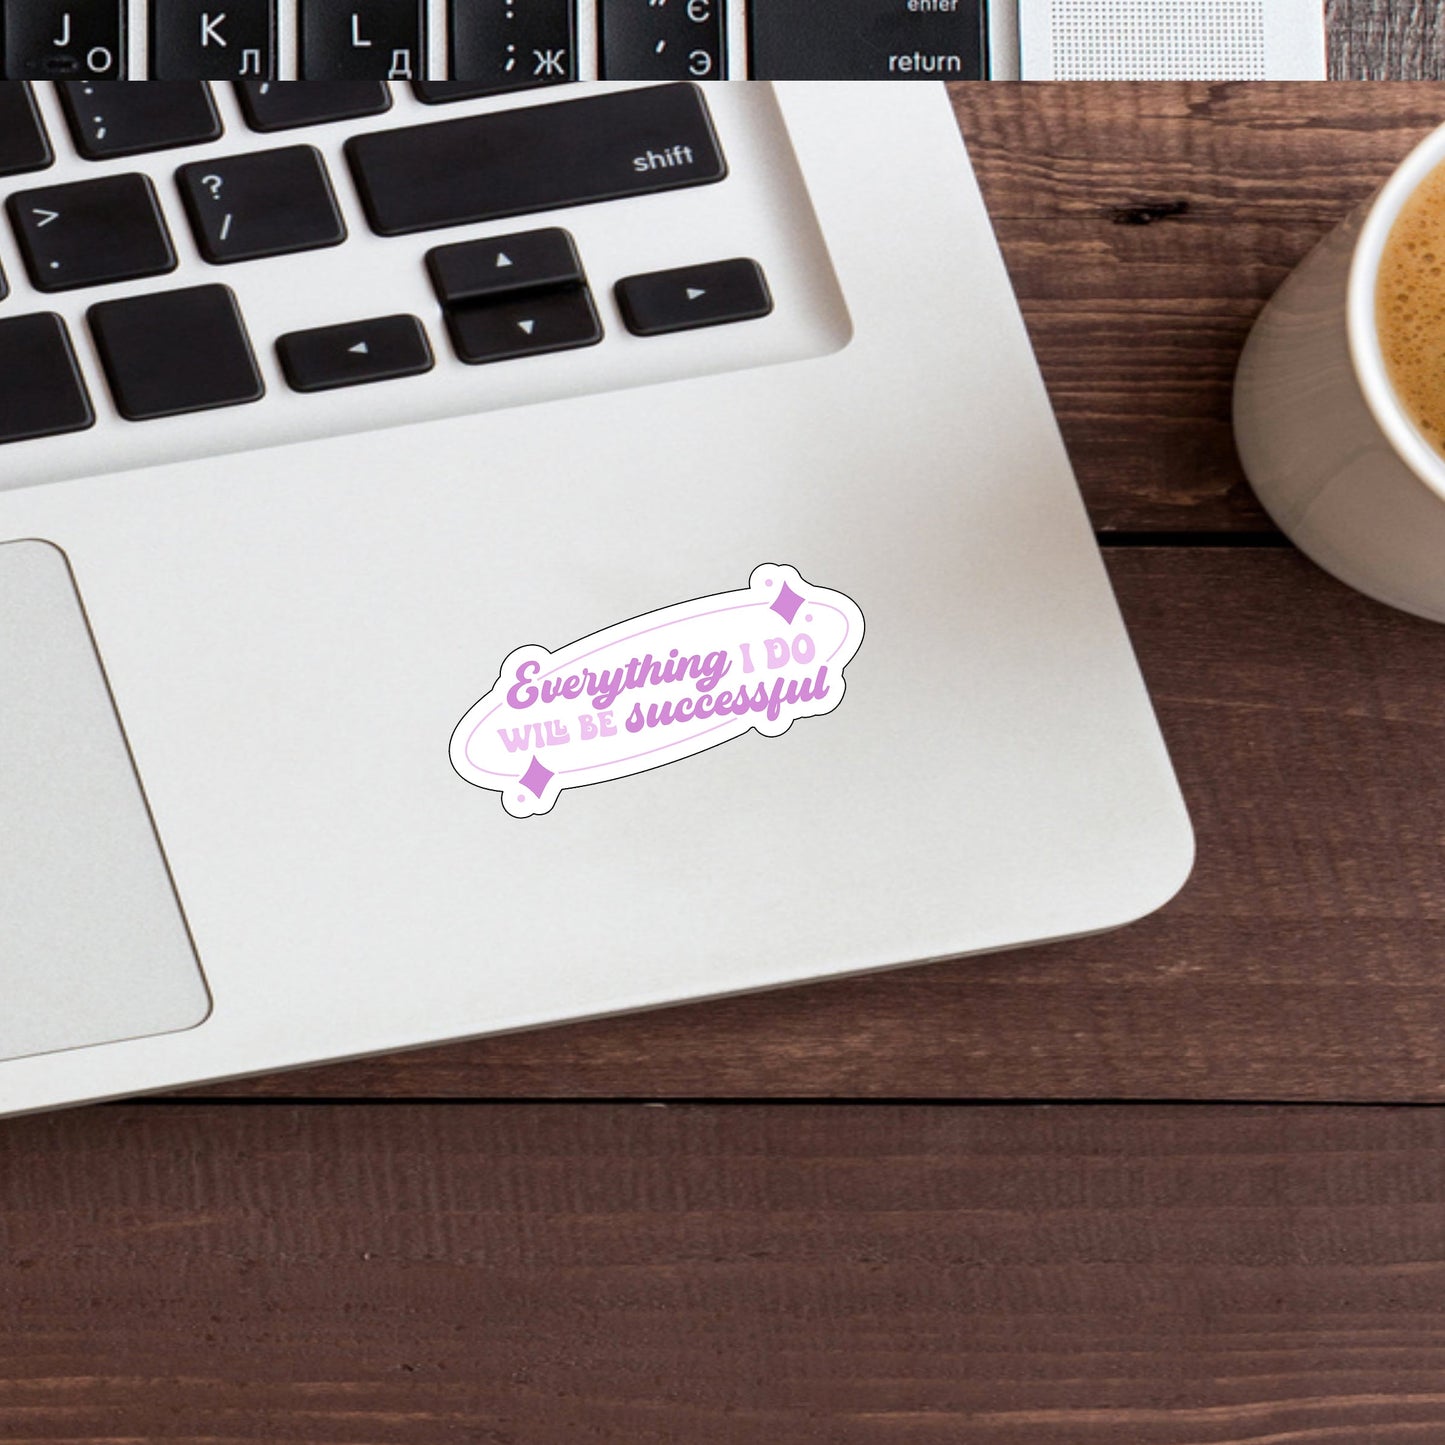 Everything I do will be successful  Sticker,  Vinyl sticker, laptop sticker, Tablet sticker